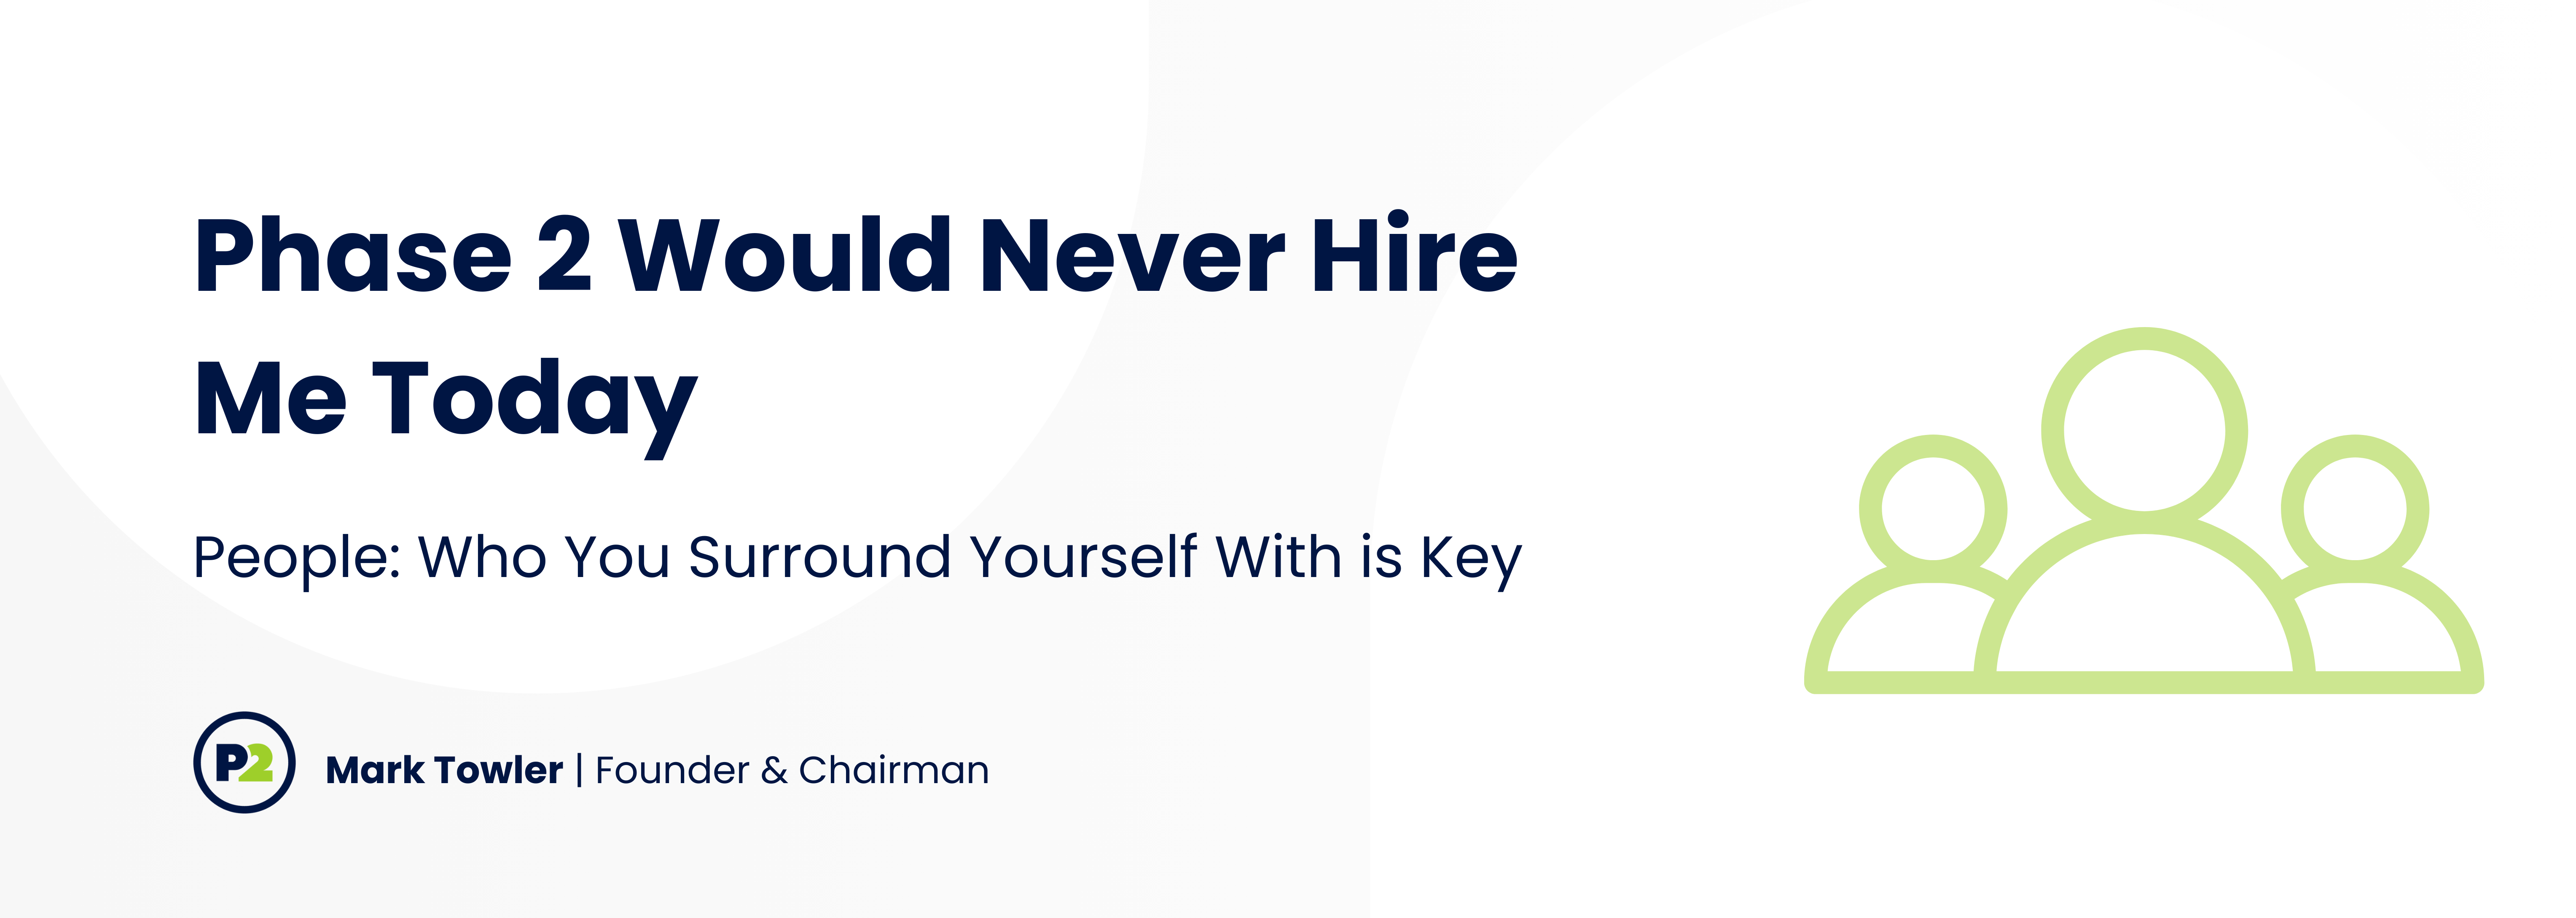 Phase 2 Would Never Hire Me Today ; People: Who You Surround Yourself With is Key